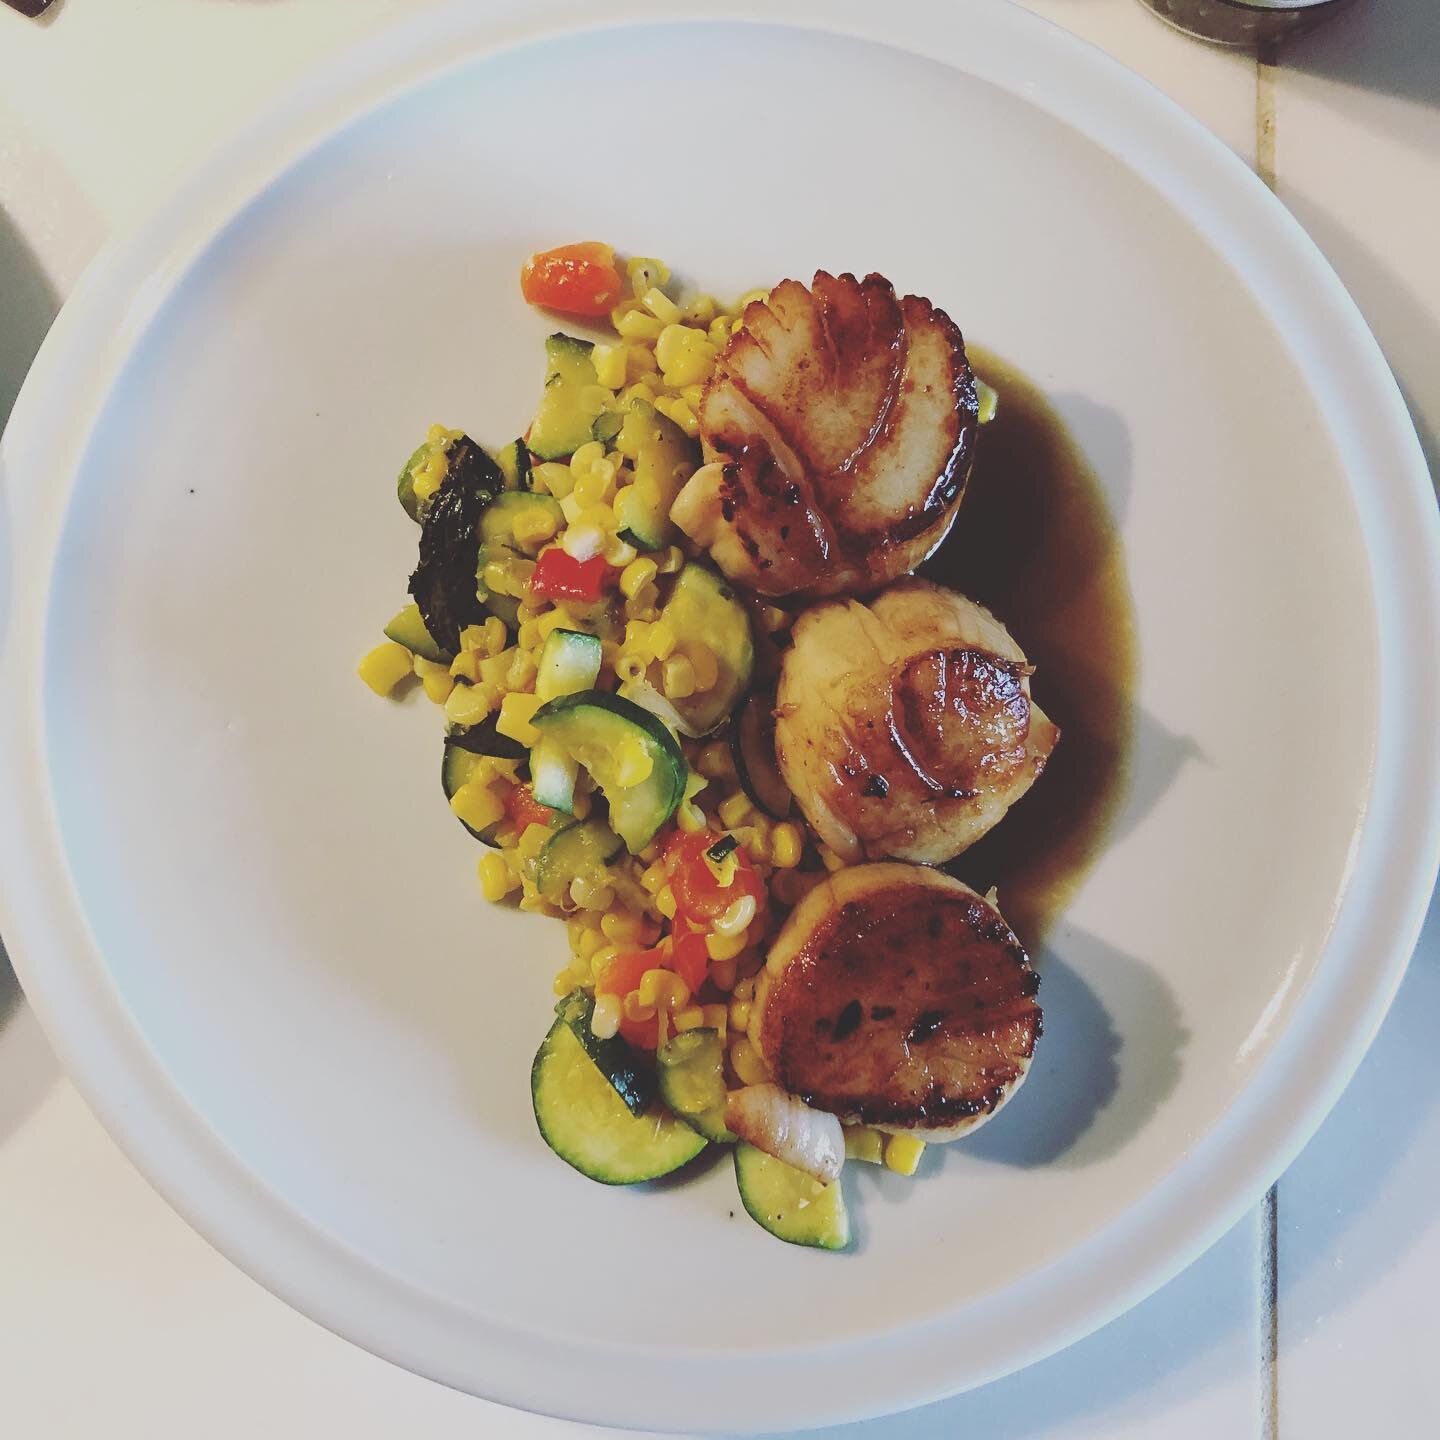 I dedicate these scallops and succotash to Kamala Harris. And Joe Biden. May your administration be every bit as delicious.
.
.
#hopeful #pleasevote #butseriouslypleasevote #joebiden #biden2020. @kamalaharris @joebiden